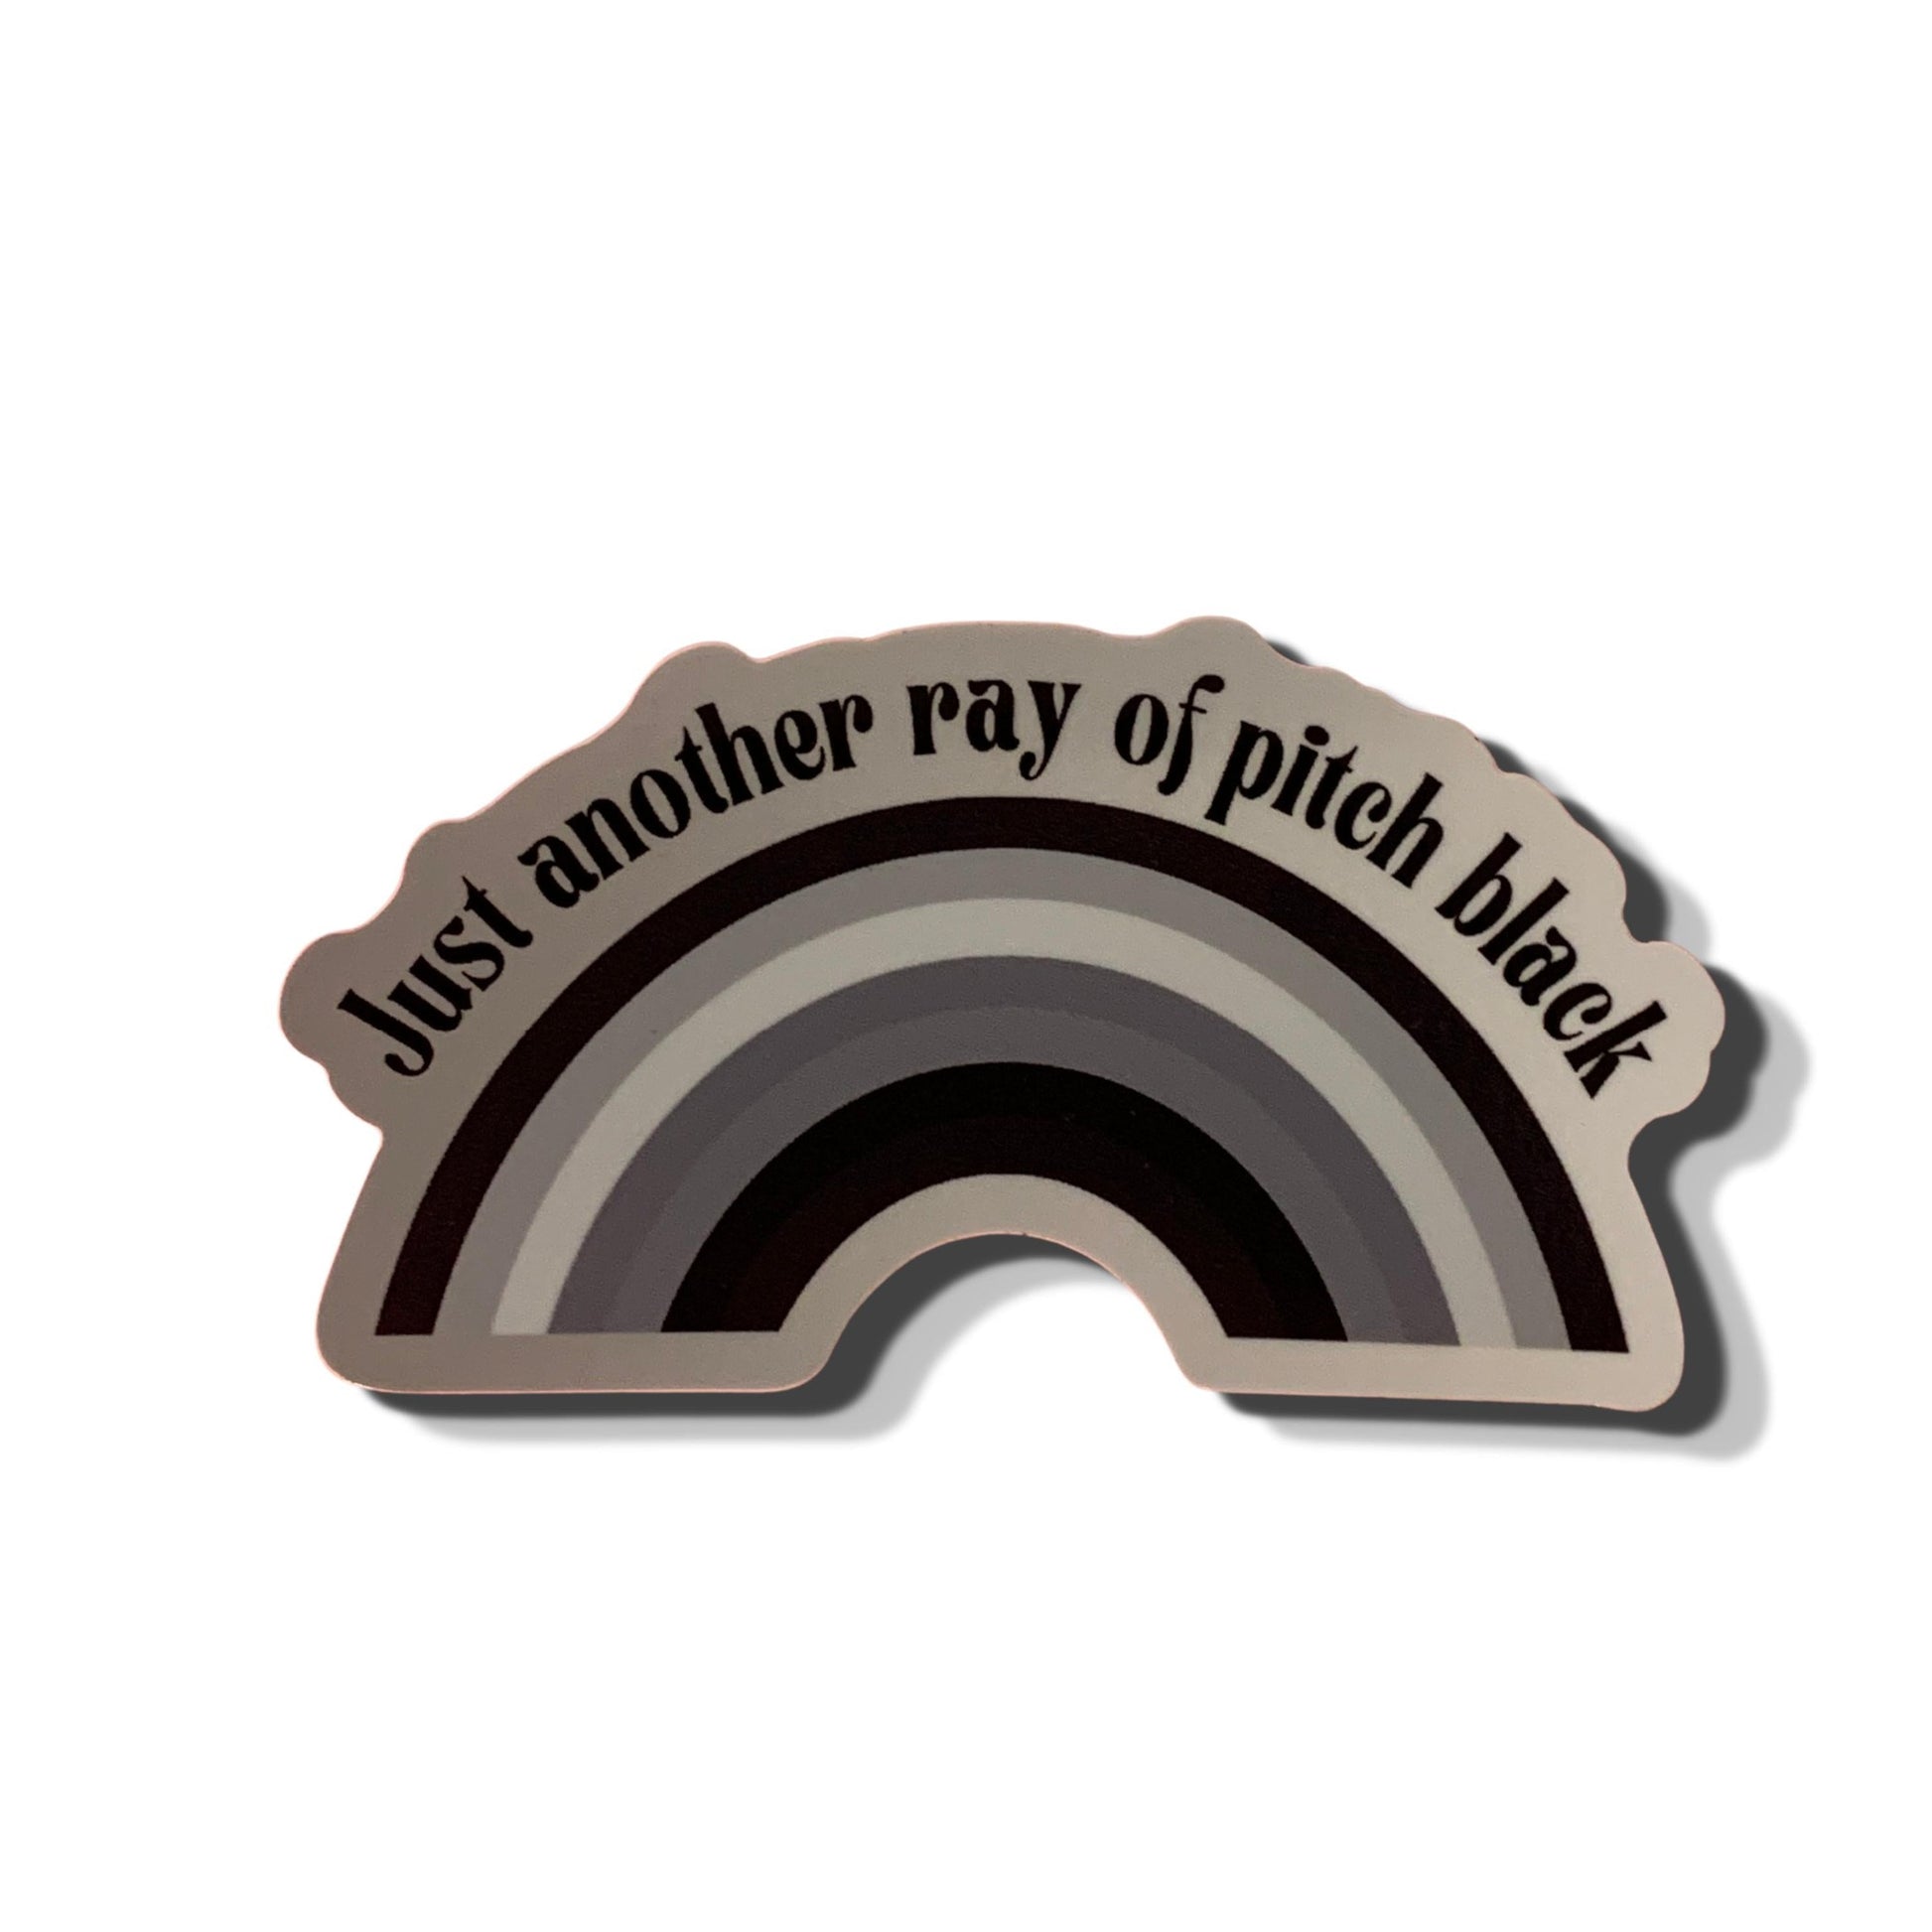 Just Another Ray Of Pitch Black Rainbow Vinyl Sticker